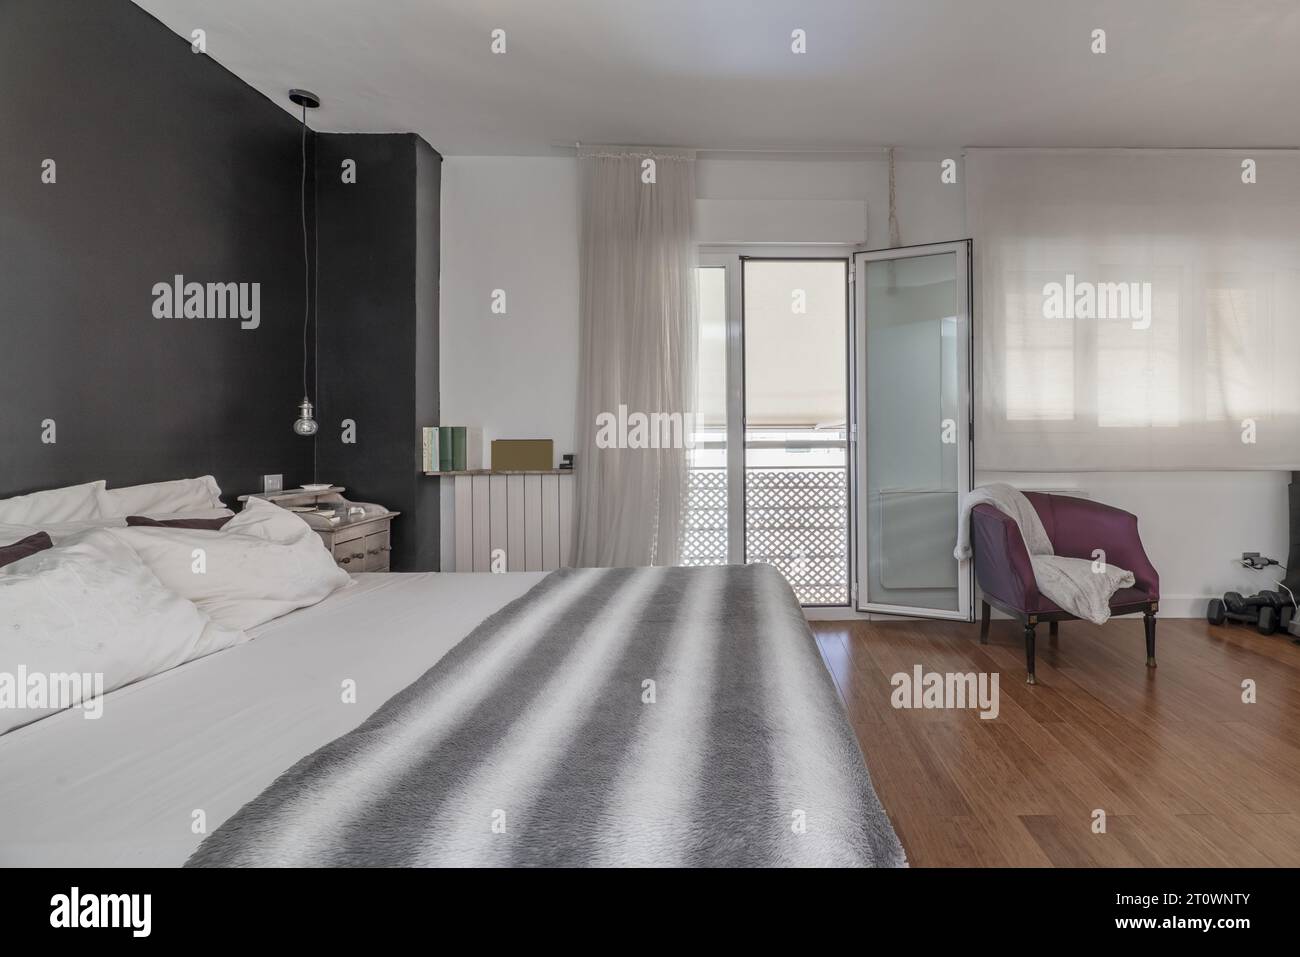 Double bedroom en suite with balcony with views, walls in two colors, wooden floors Stock Photo